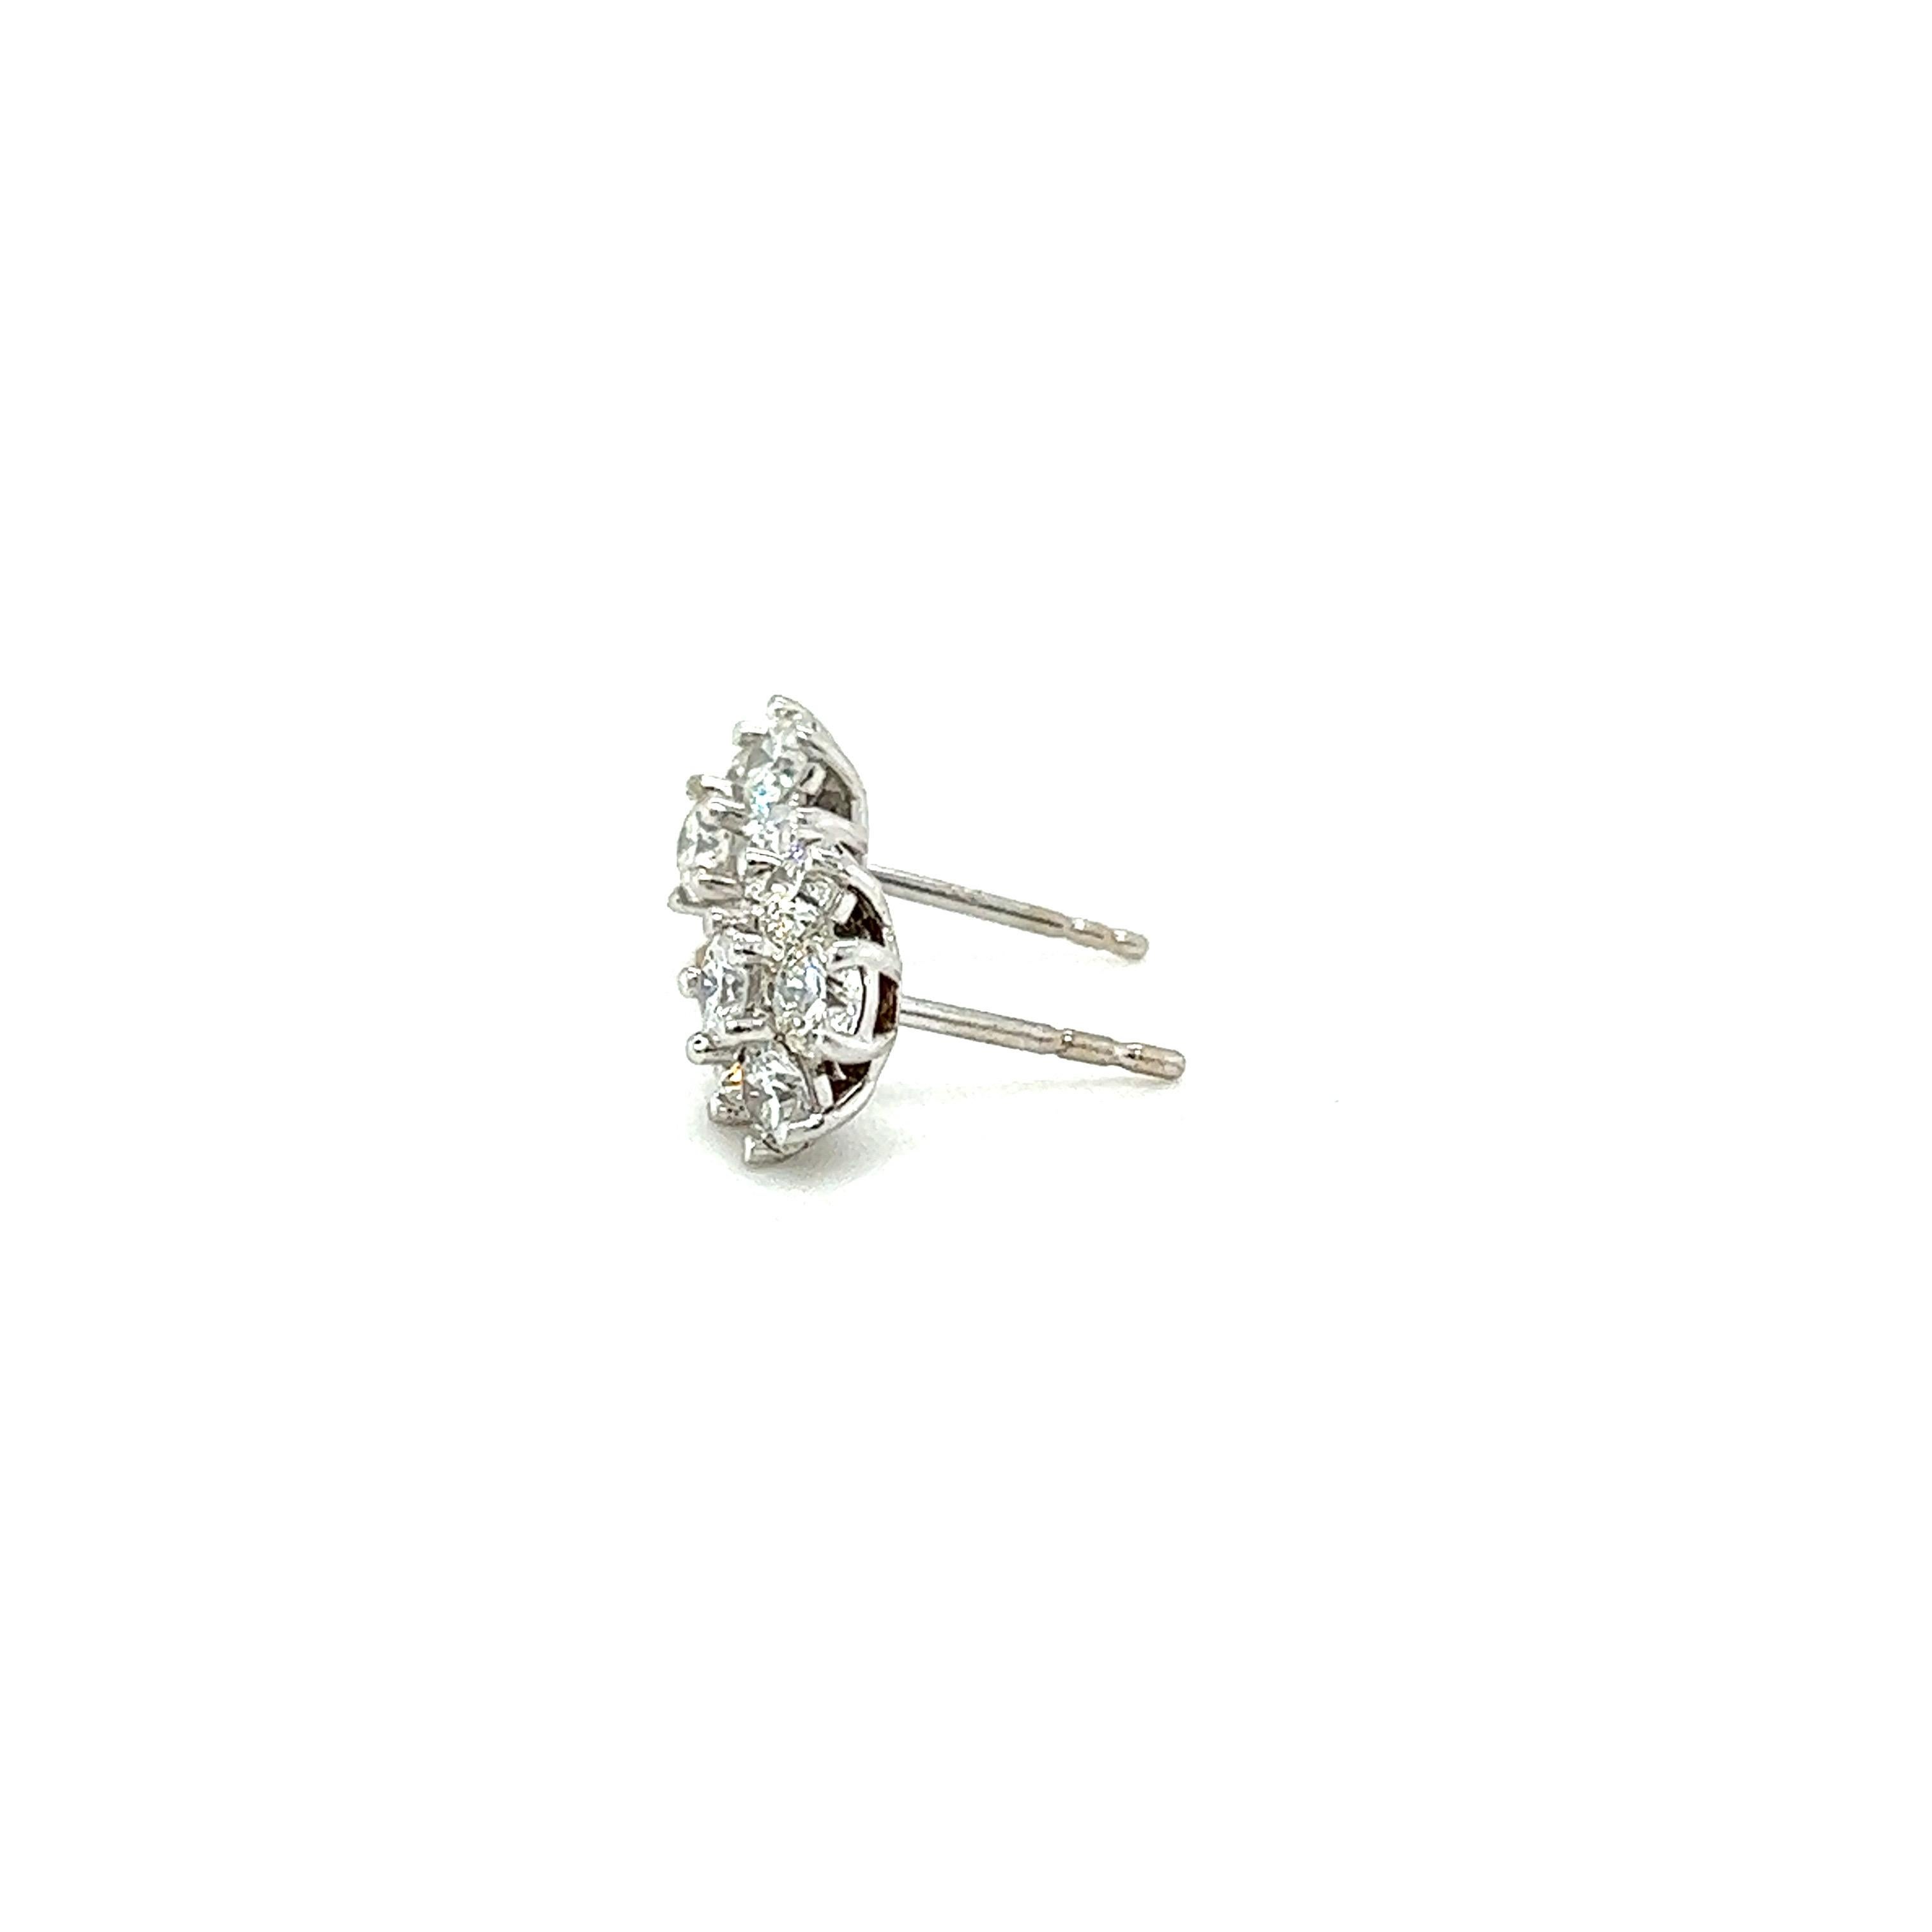 Round Cut 2.25 Carat Natural Diamond Earrings For Sale